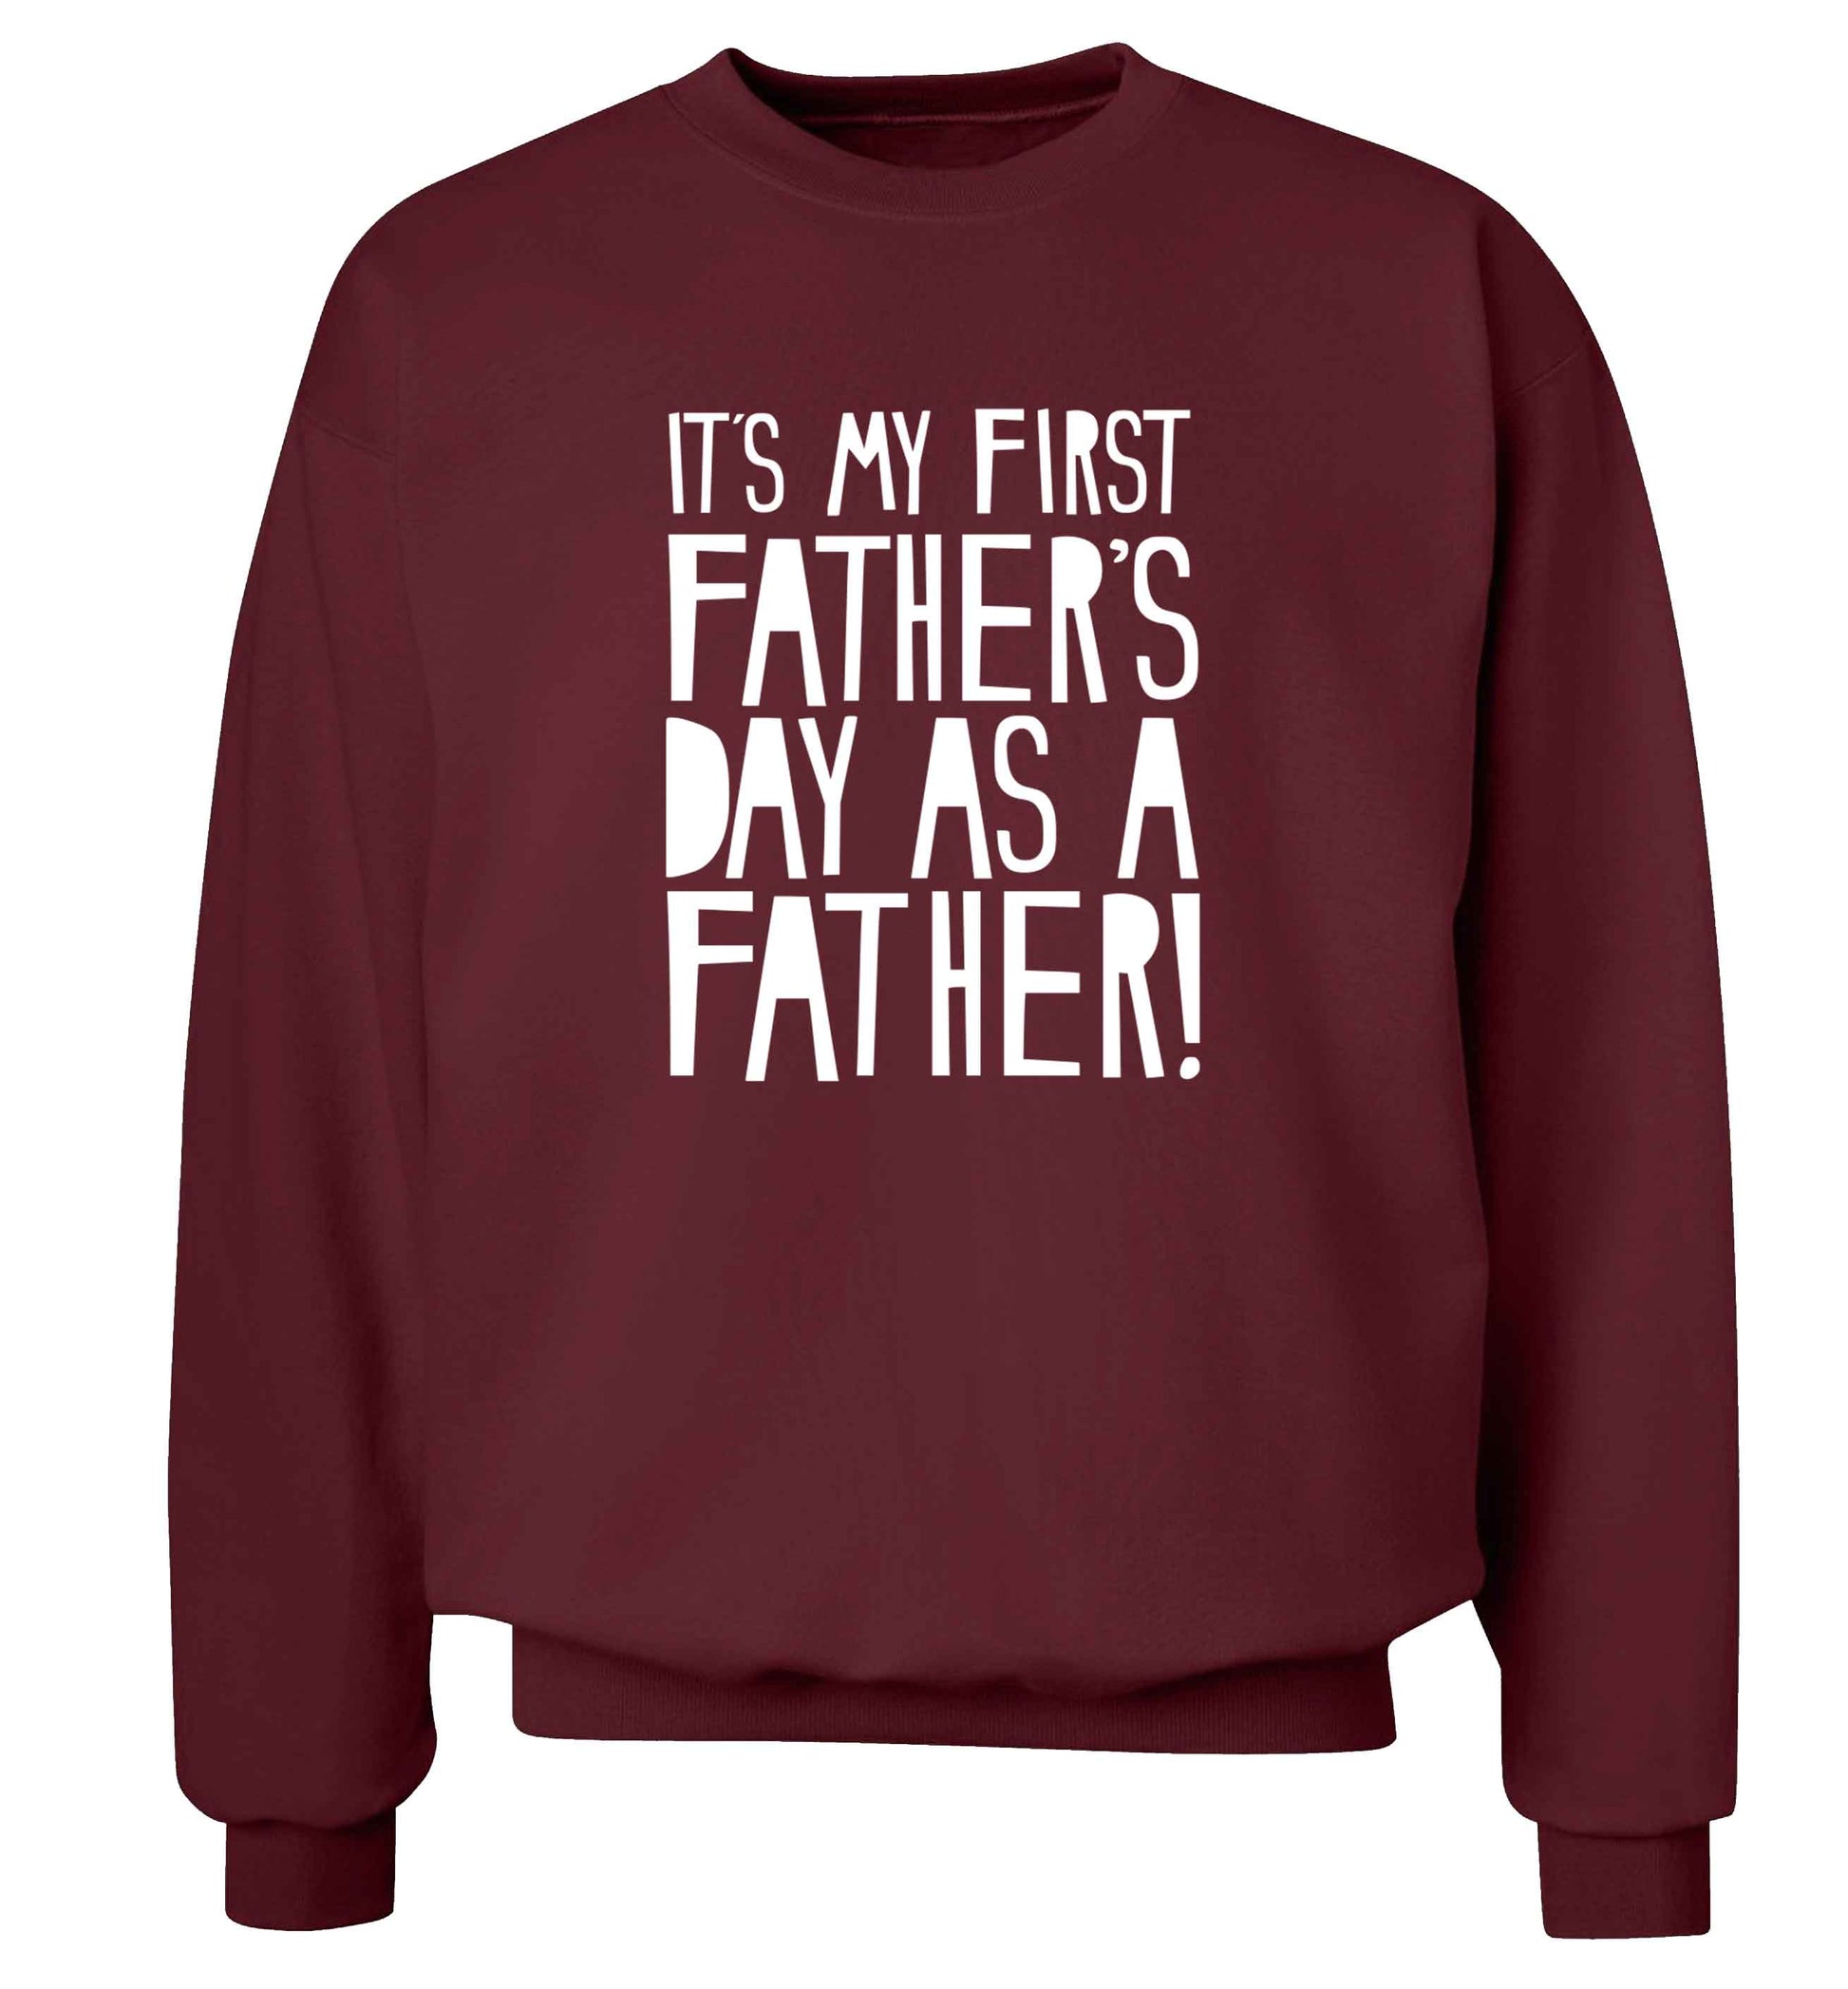 It's my first father's day as a father! adult's unisex maroon sweater 2XL